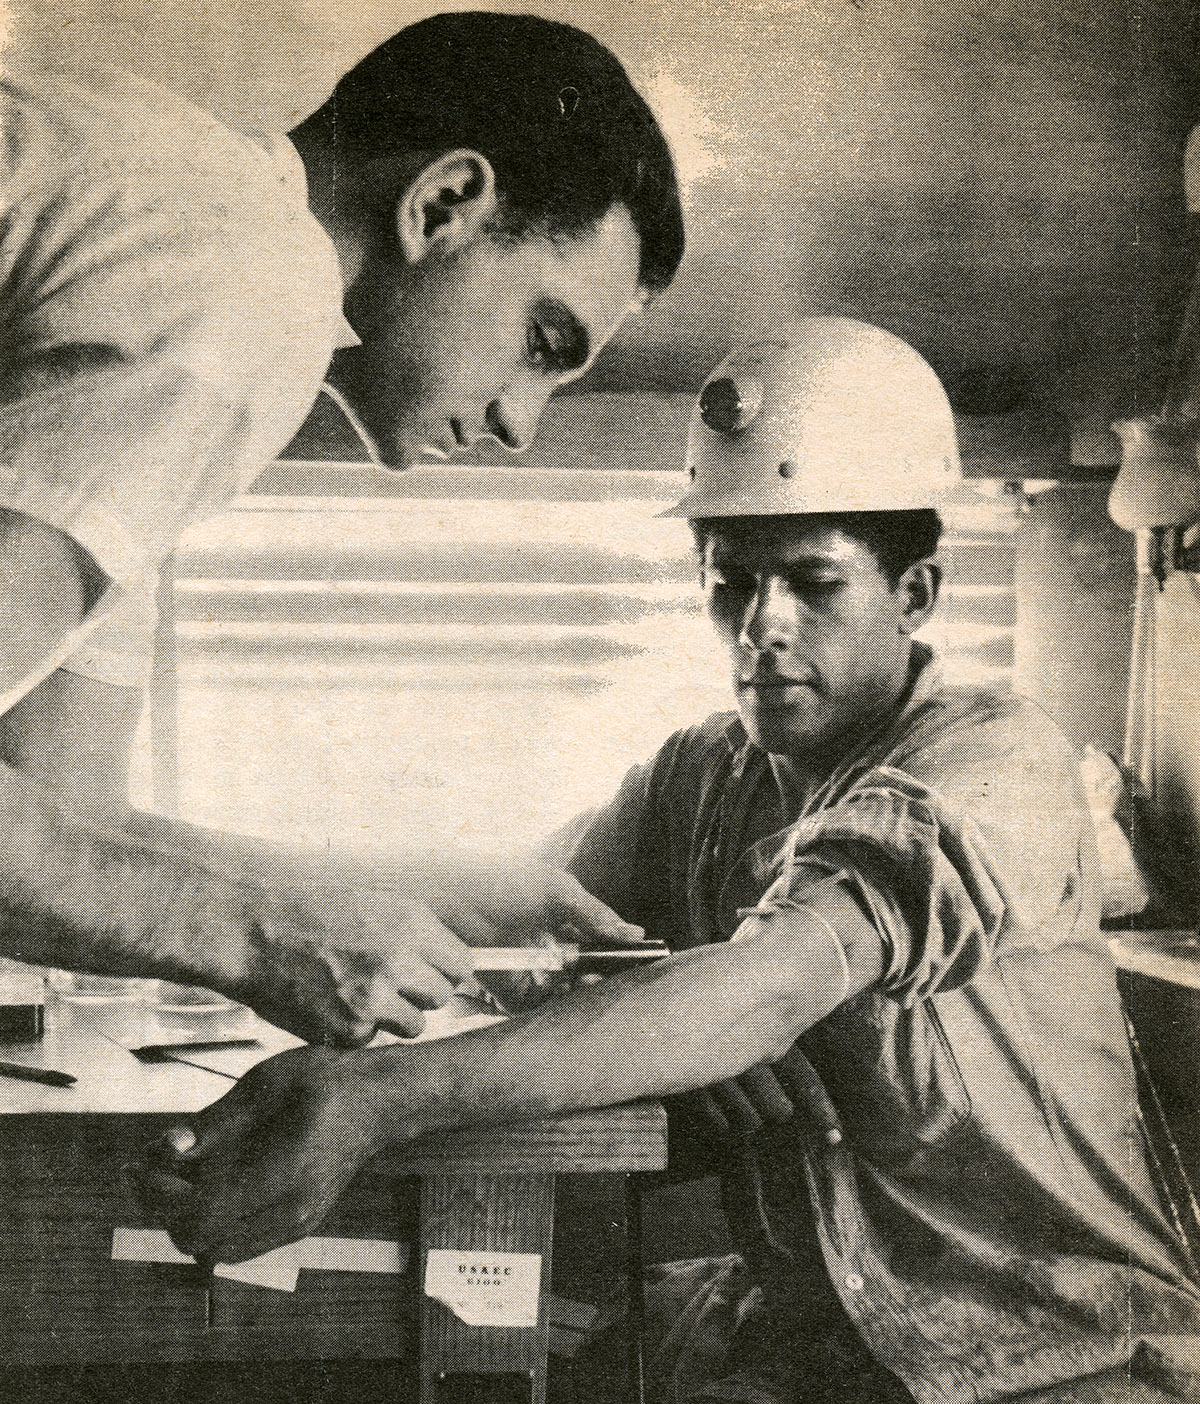 A white man standing leans down while taking blood from a seated Native American man in a hard hat.